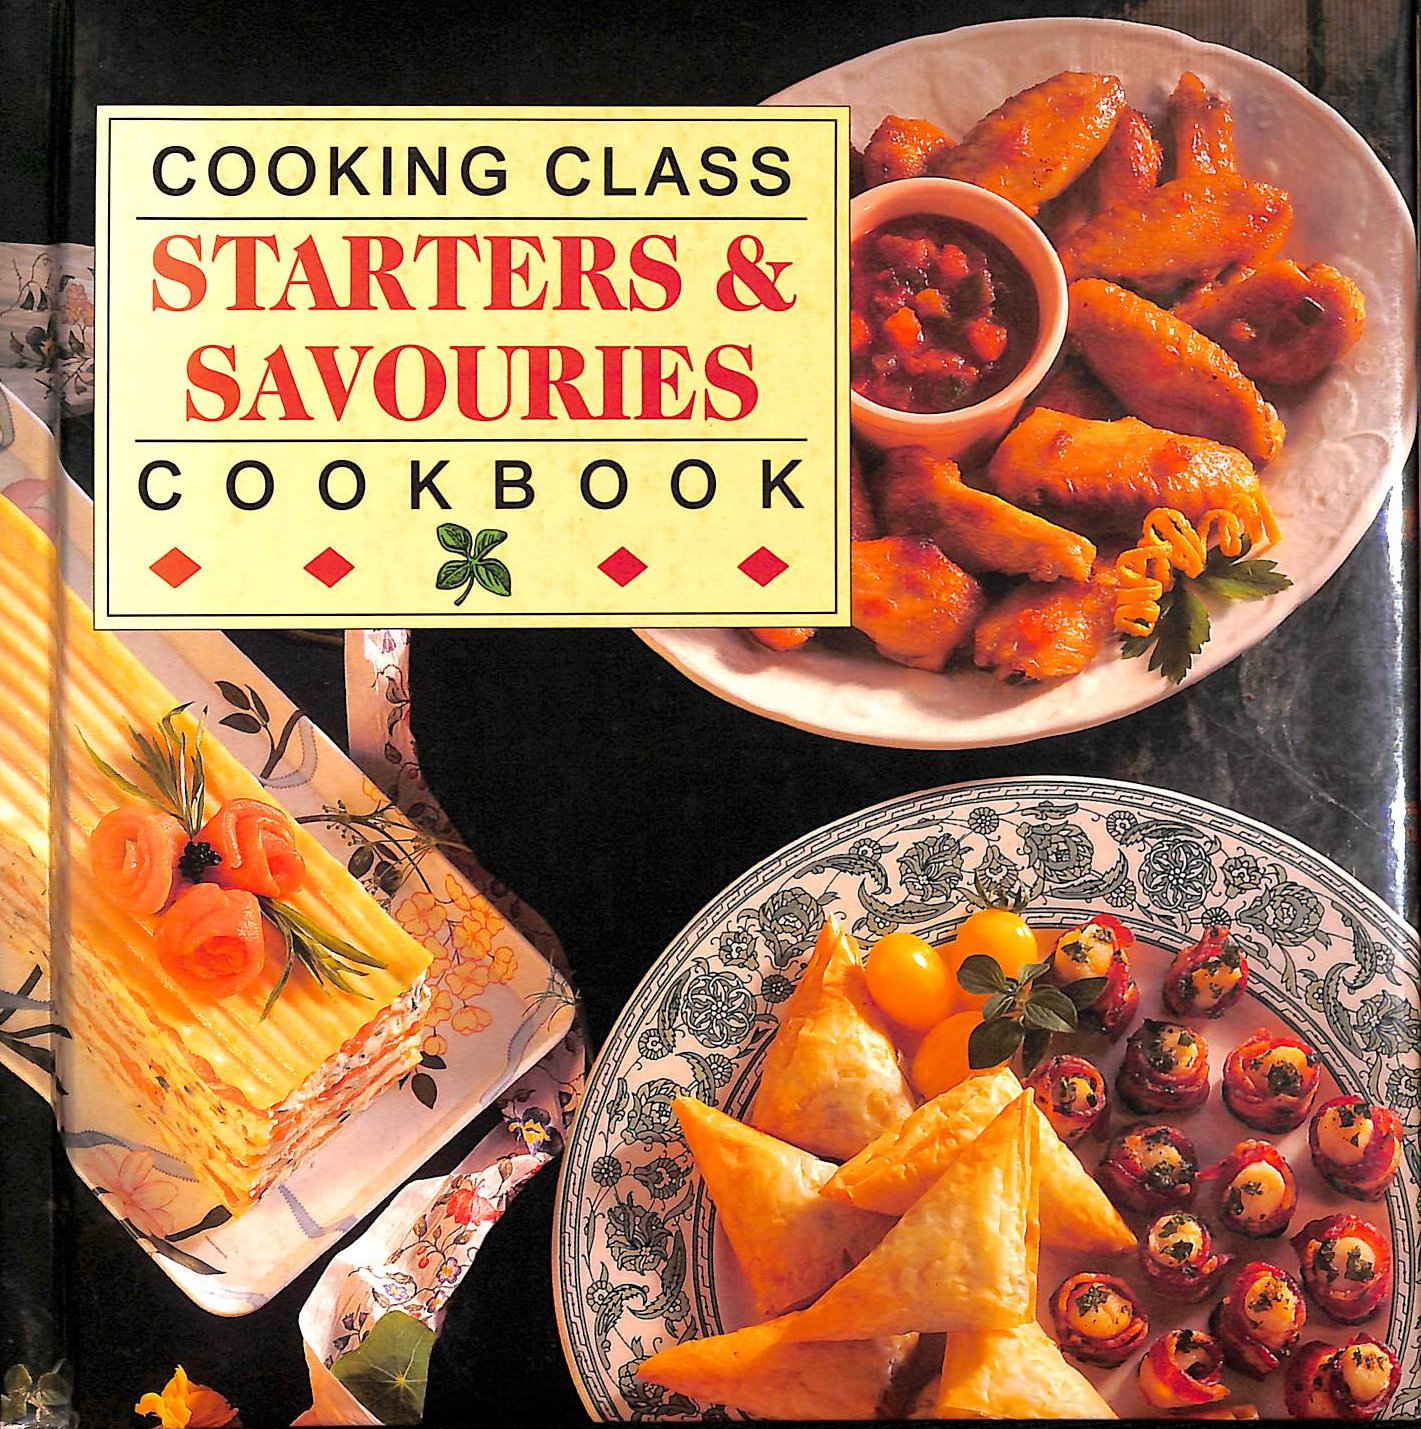 UNNAMED - Starters and Savouries Cook Book (Cooking Class)